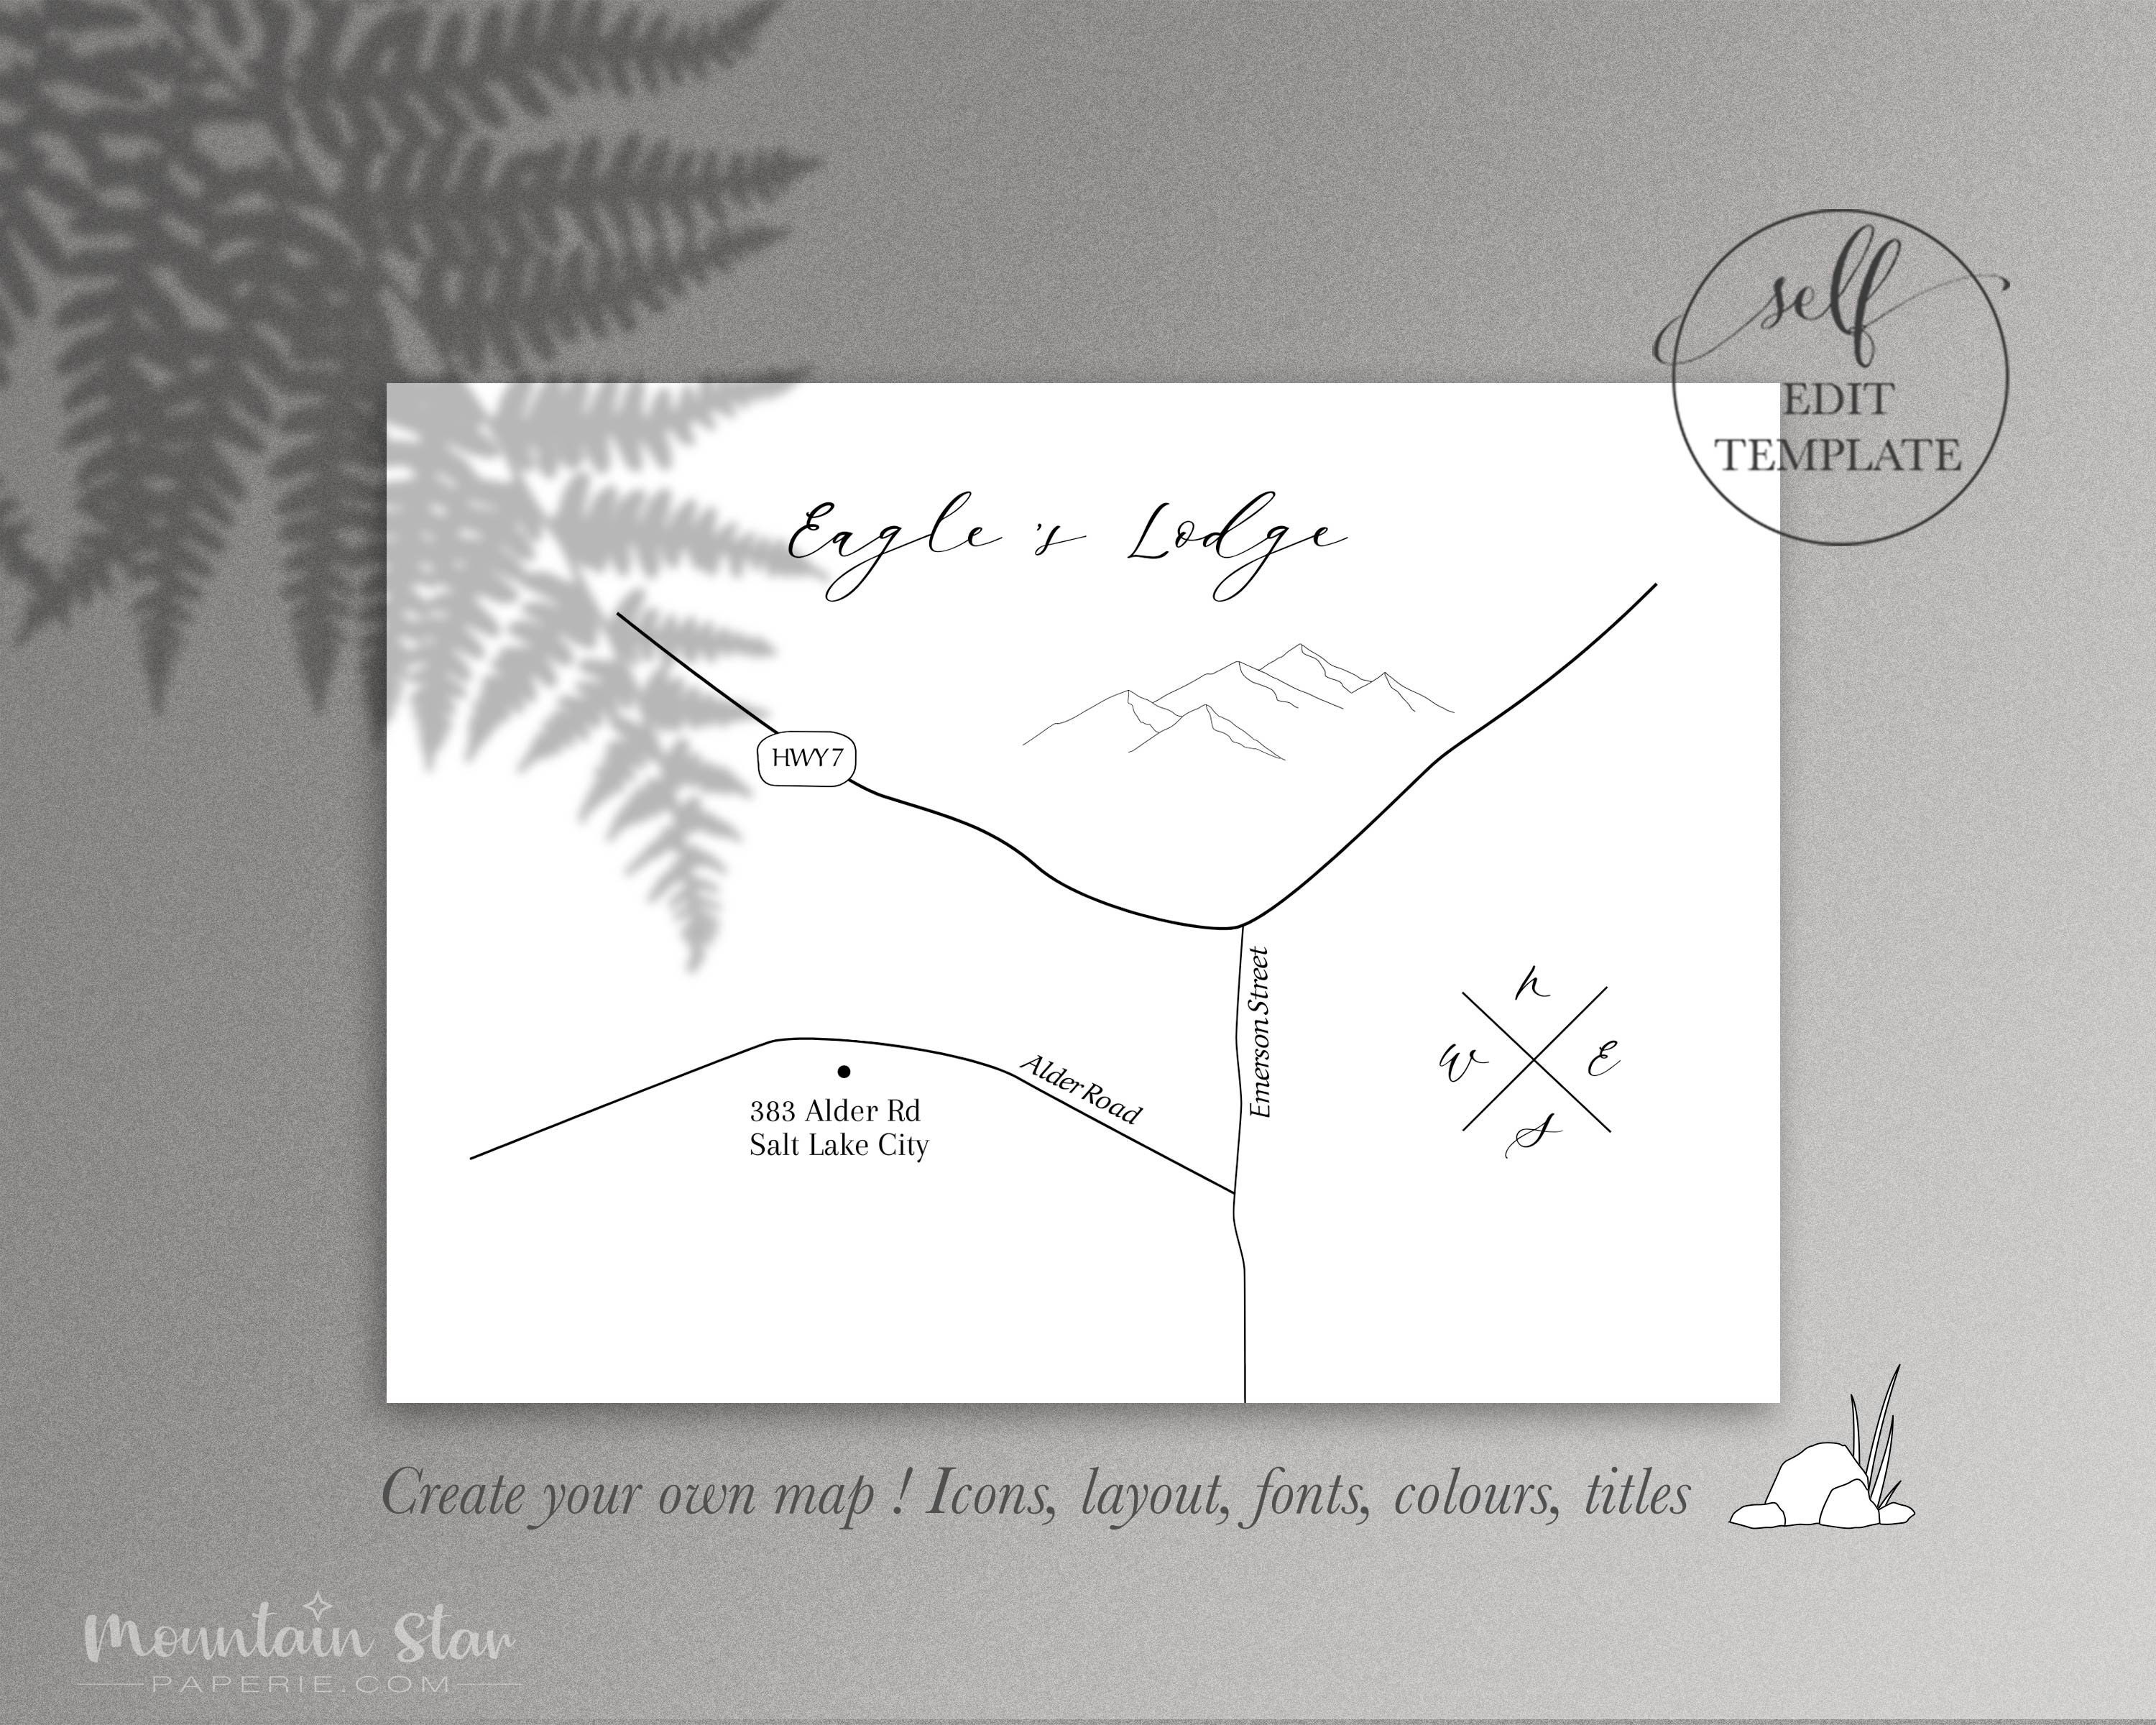 Print Your Place, Our First Date Custom Plaque, Personalized Map Acrylic  Plaque, One Year Anniversary Gift, Custom Coordinates, Home Decor 